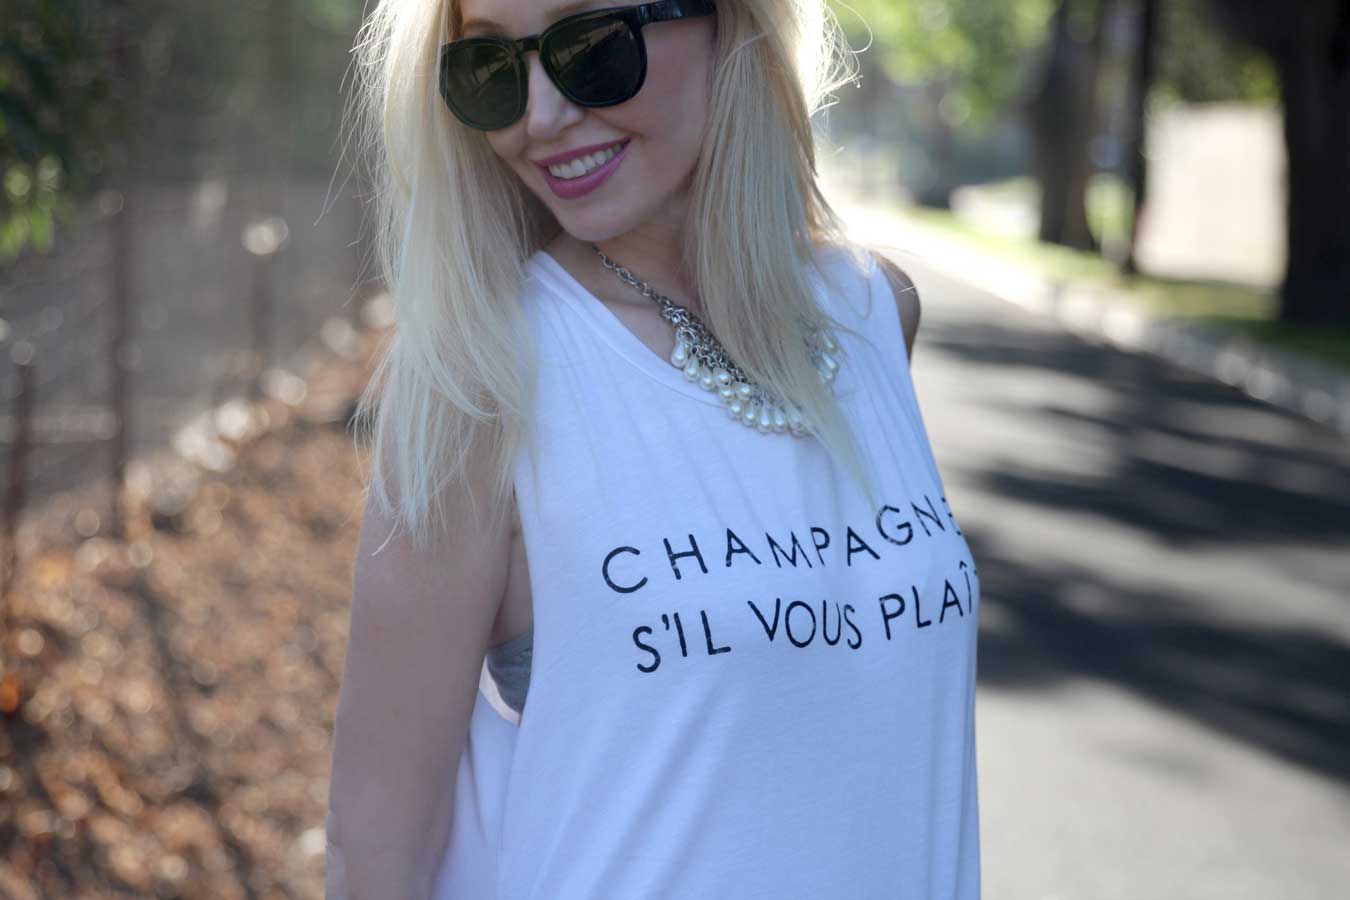 currently crushing, champagne sil vous plait t shirt, spy optic quinn sunglasses